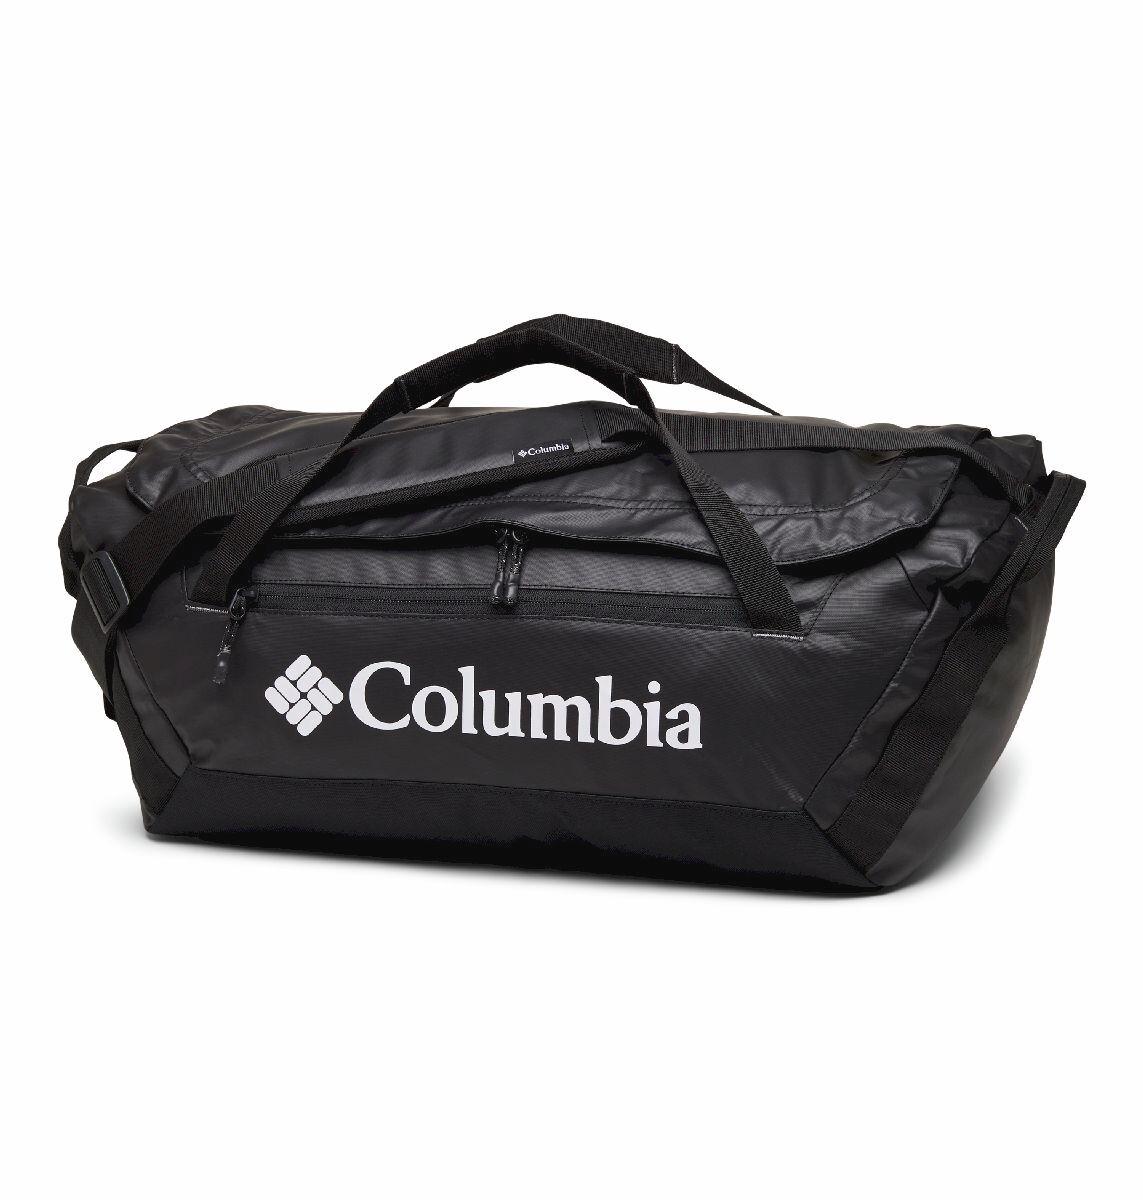 Columbia On The Go™ 40L Duffle - Travel bag